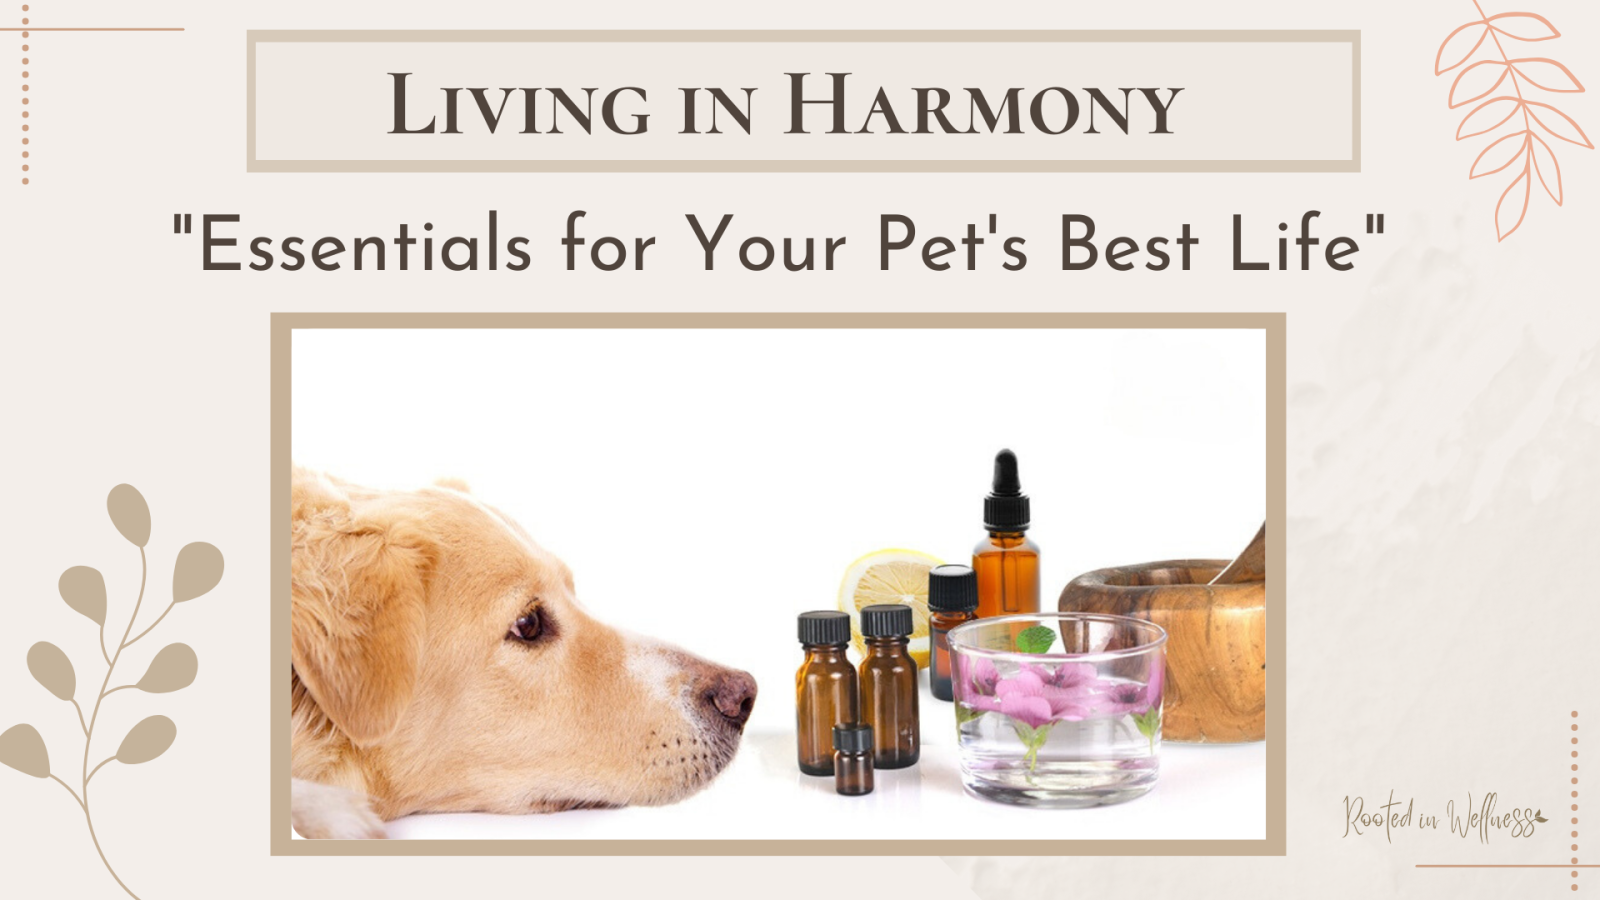 Living in Harmony - "Essentials For Your Pet's Best Life"